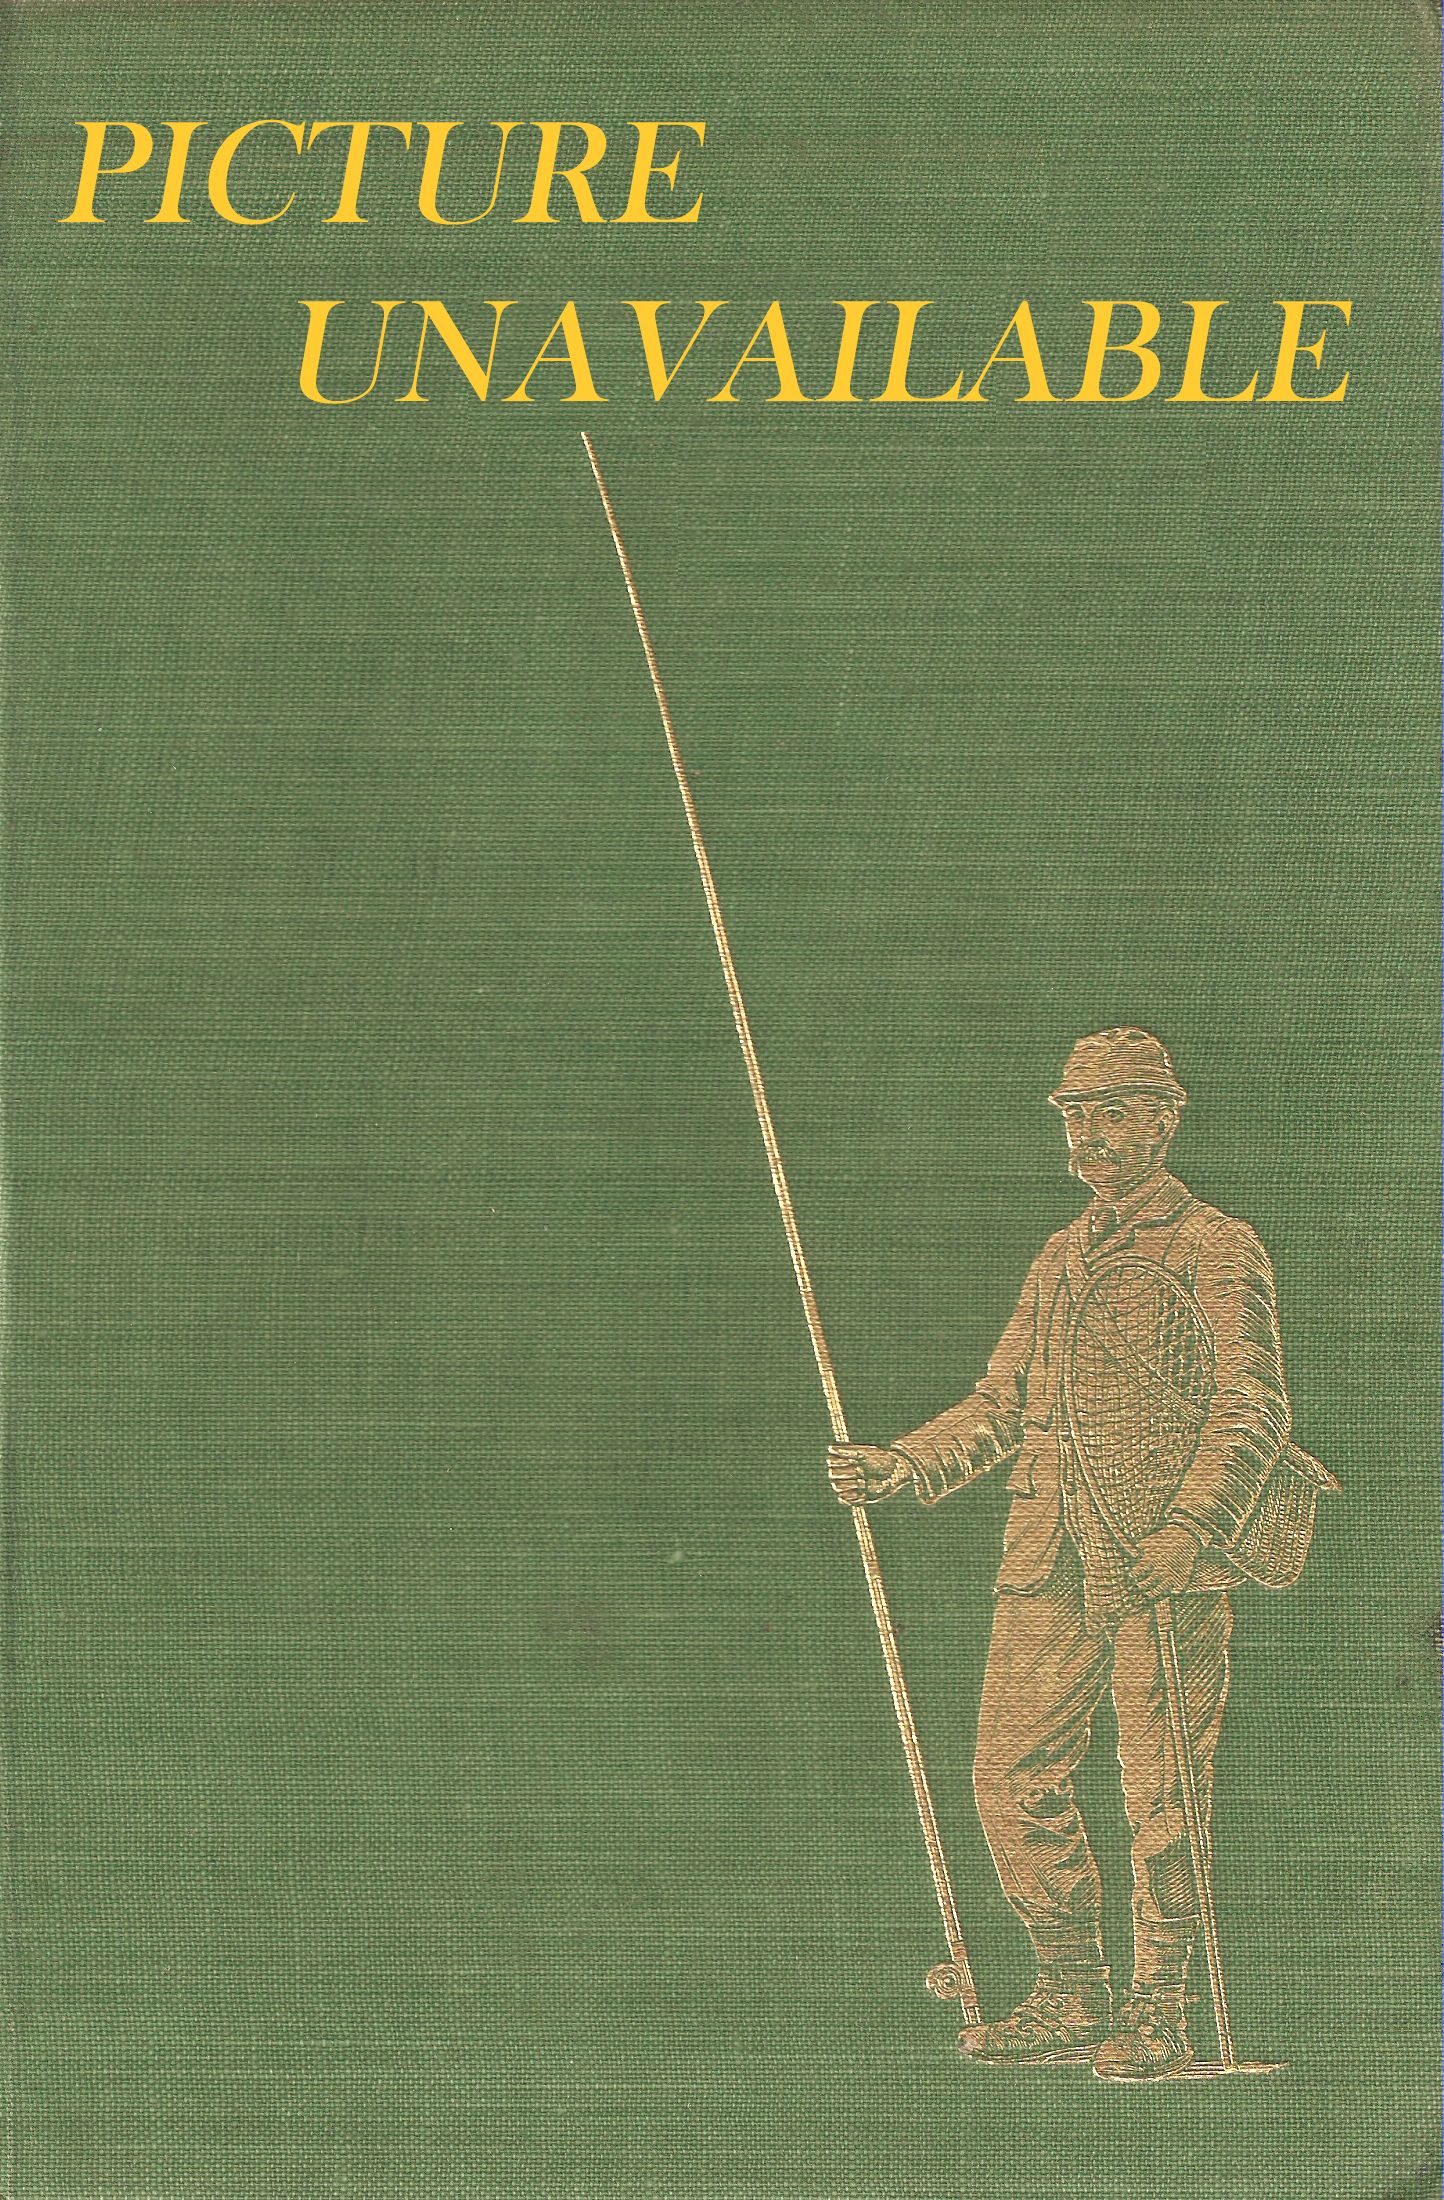 THE LETTERS OF TWO FISHERMEN: Relating angling experiences in West Africa  and on English rivers, and giving much useful advice and information on  fish and fishing. With Appendix. By Hugh Copley.